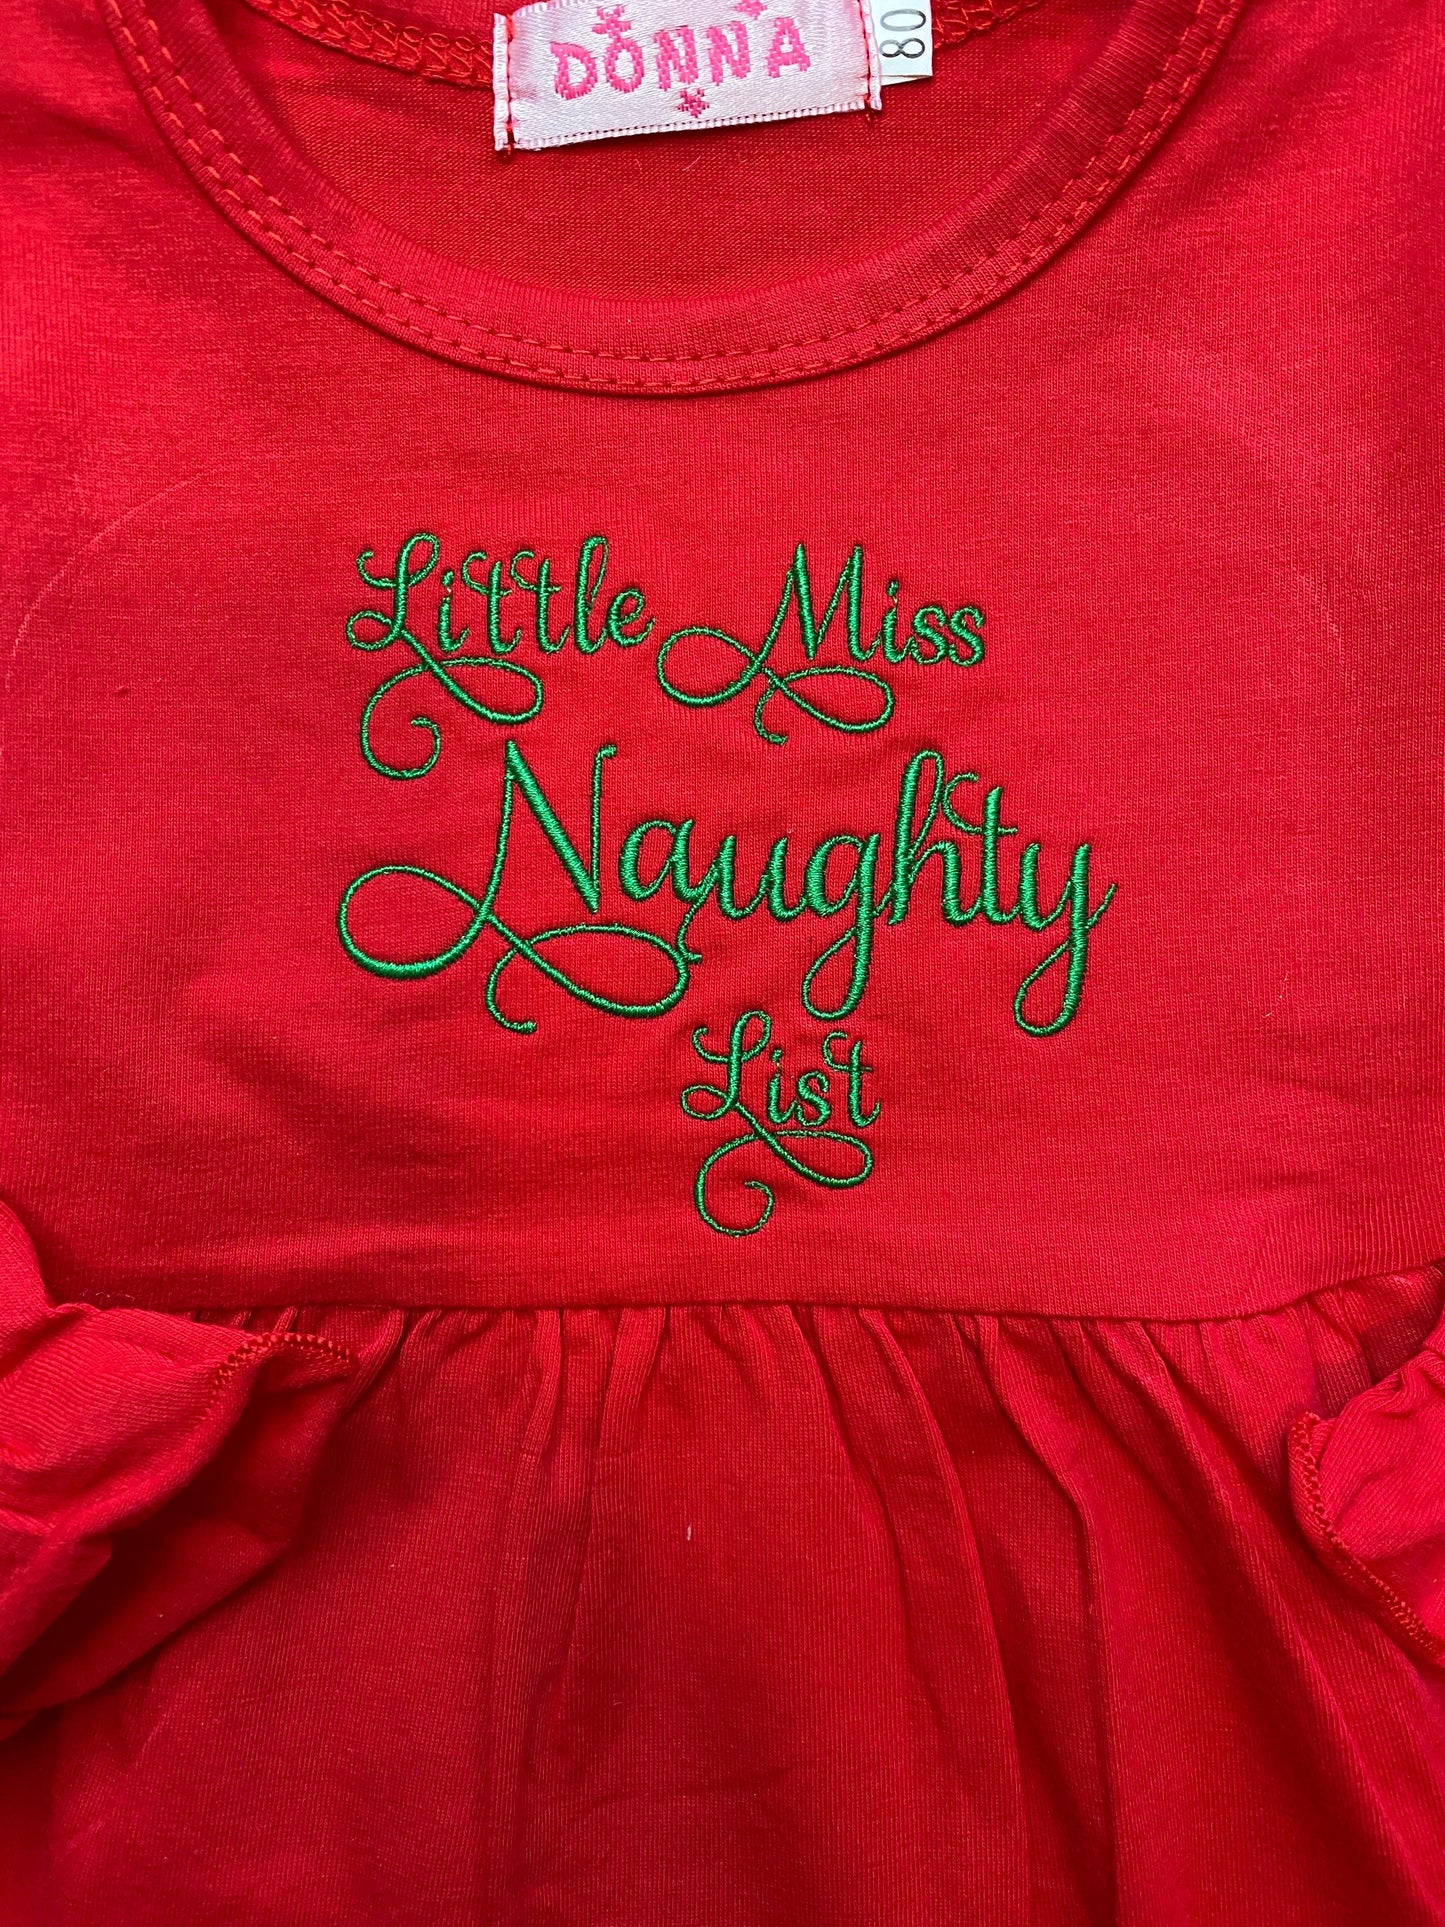 Christmas Outfit Naughty List girls hi-lo ruffle top pants headband flowy cute funny Santa Long sleeved lovely toddler baby infant dress